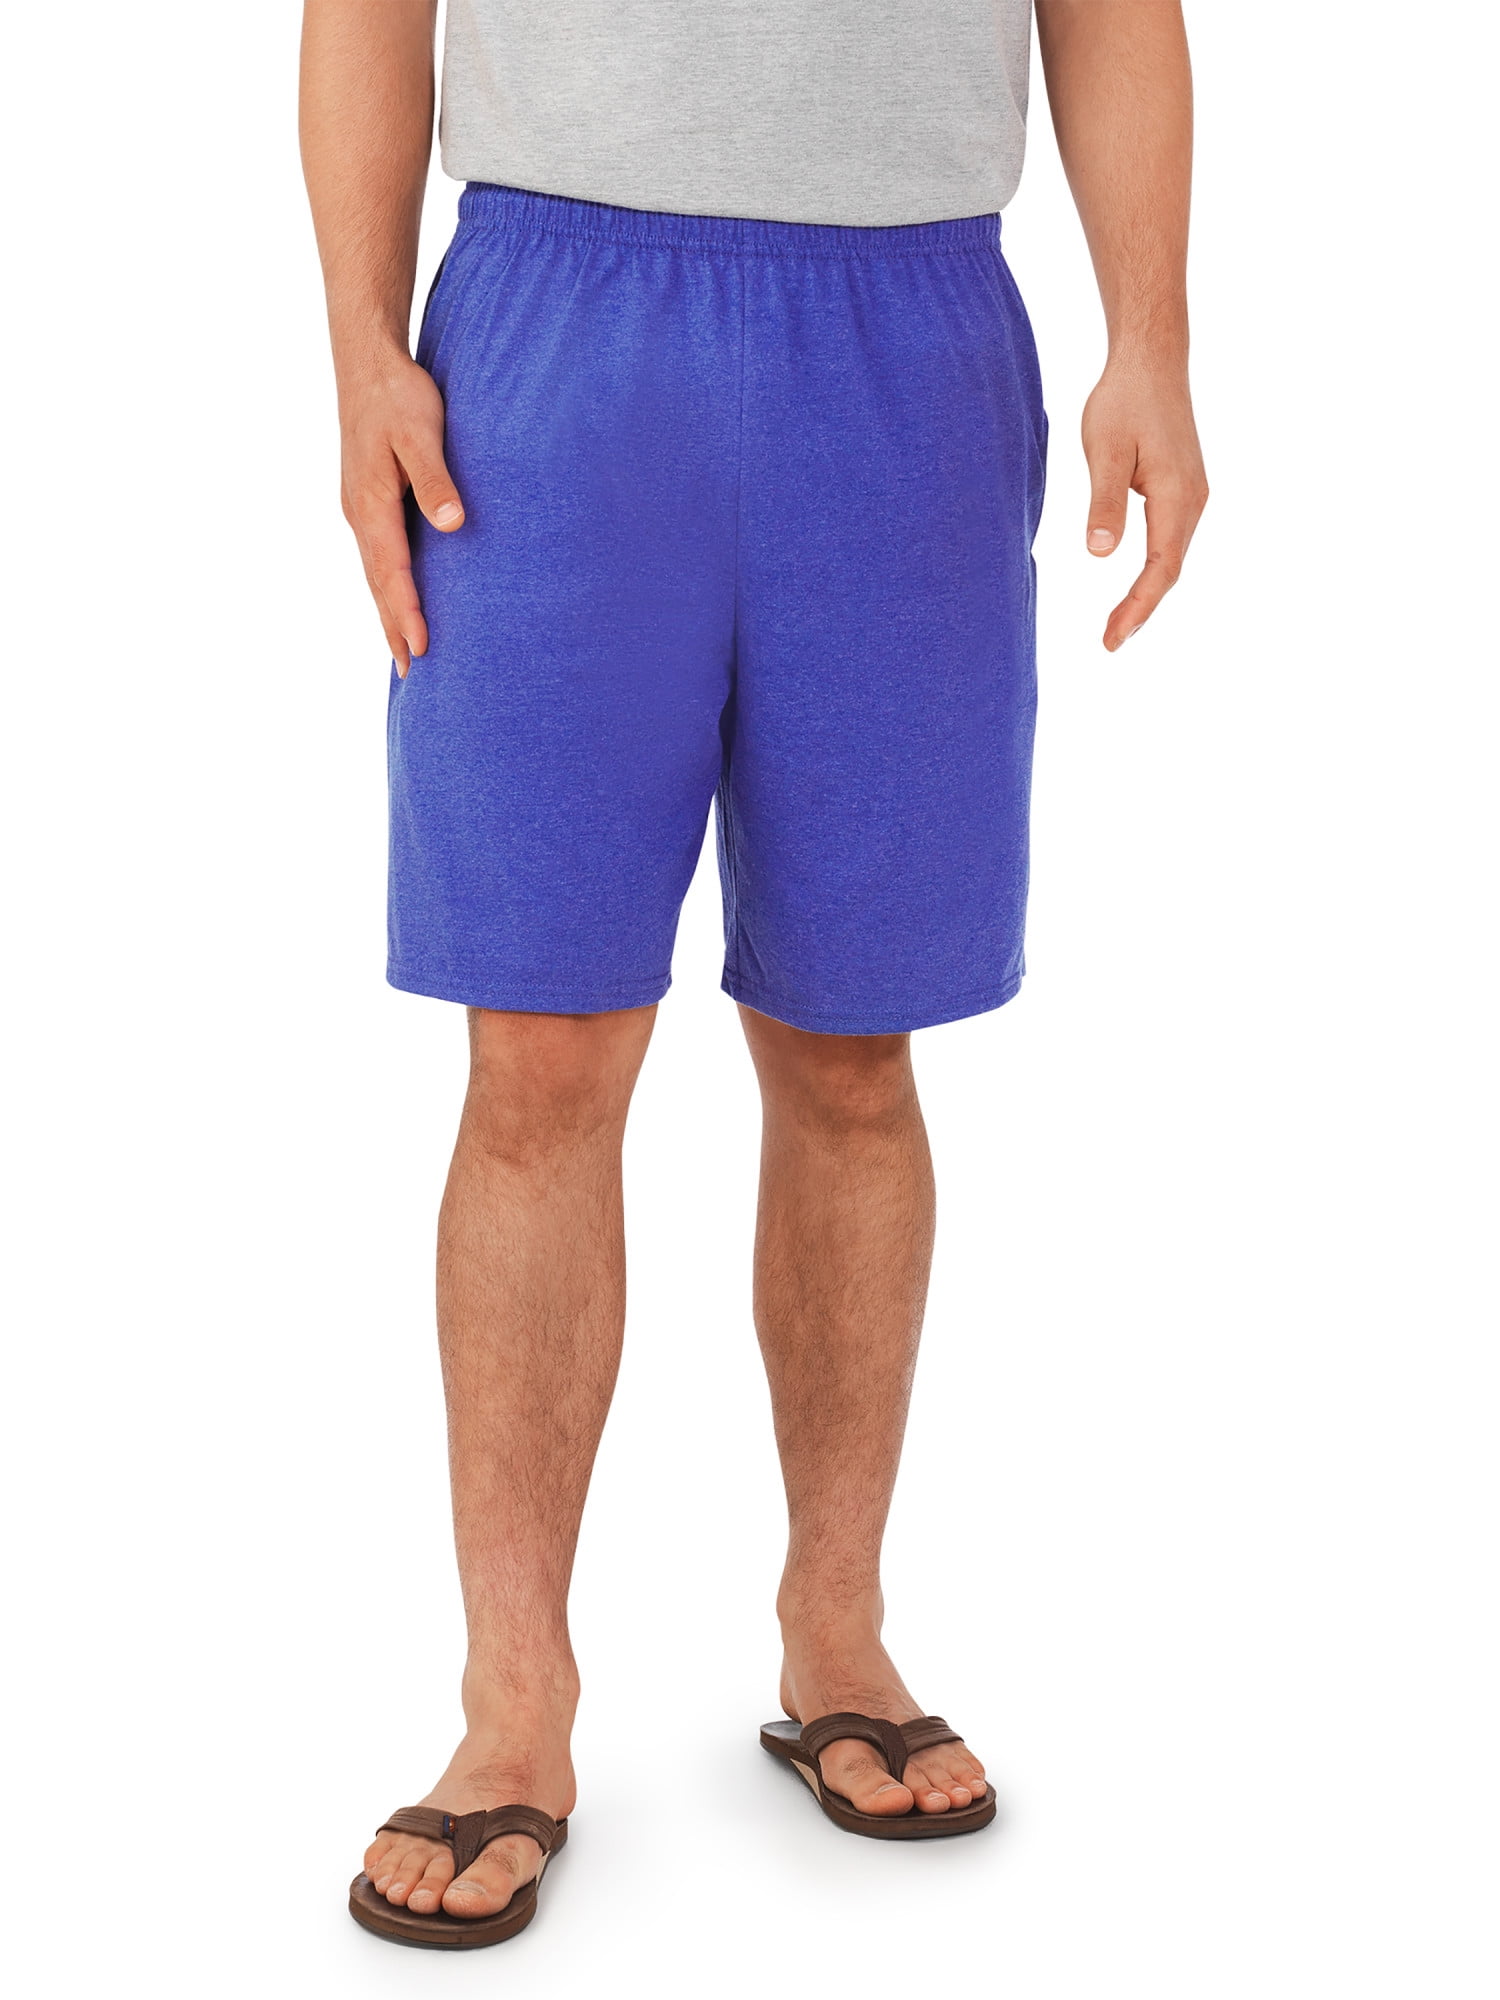 fruit of the loom men's platinum jersey shorts with side pockets